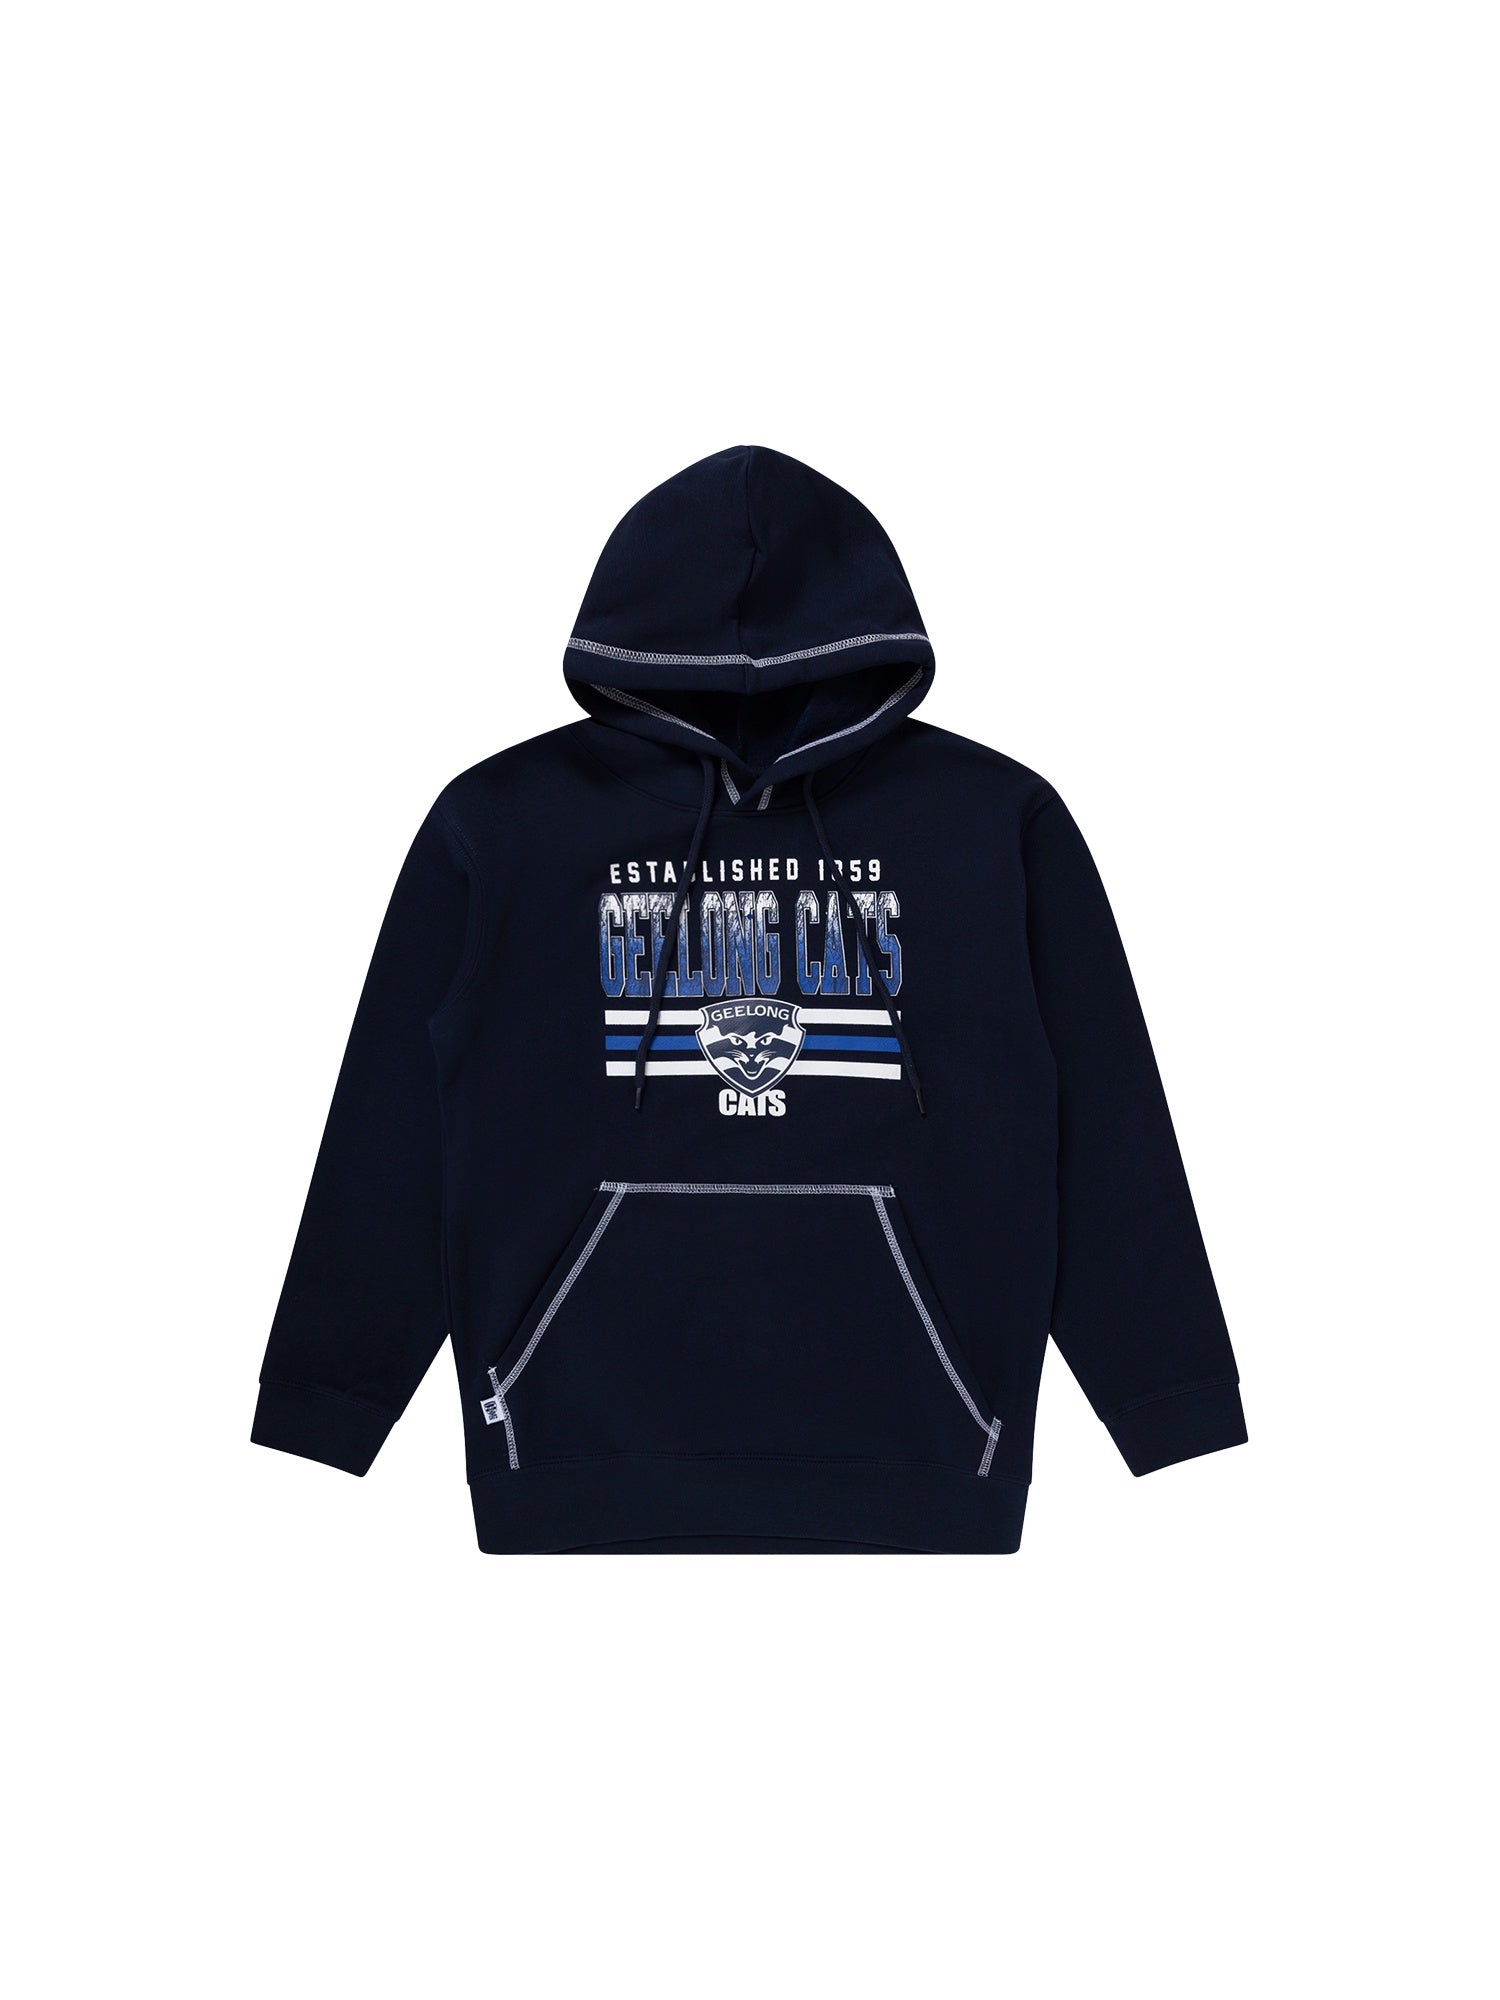 Geelong Cats Youth Sketch Hood